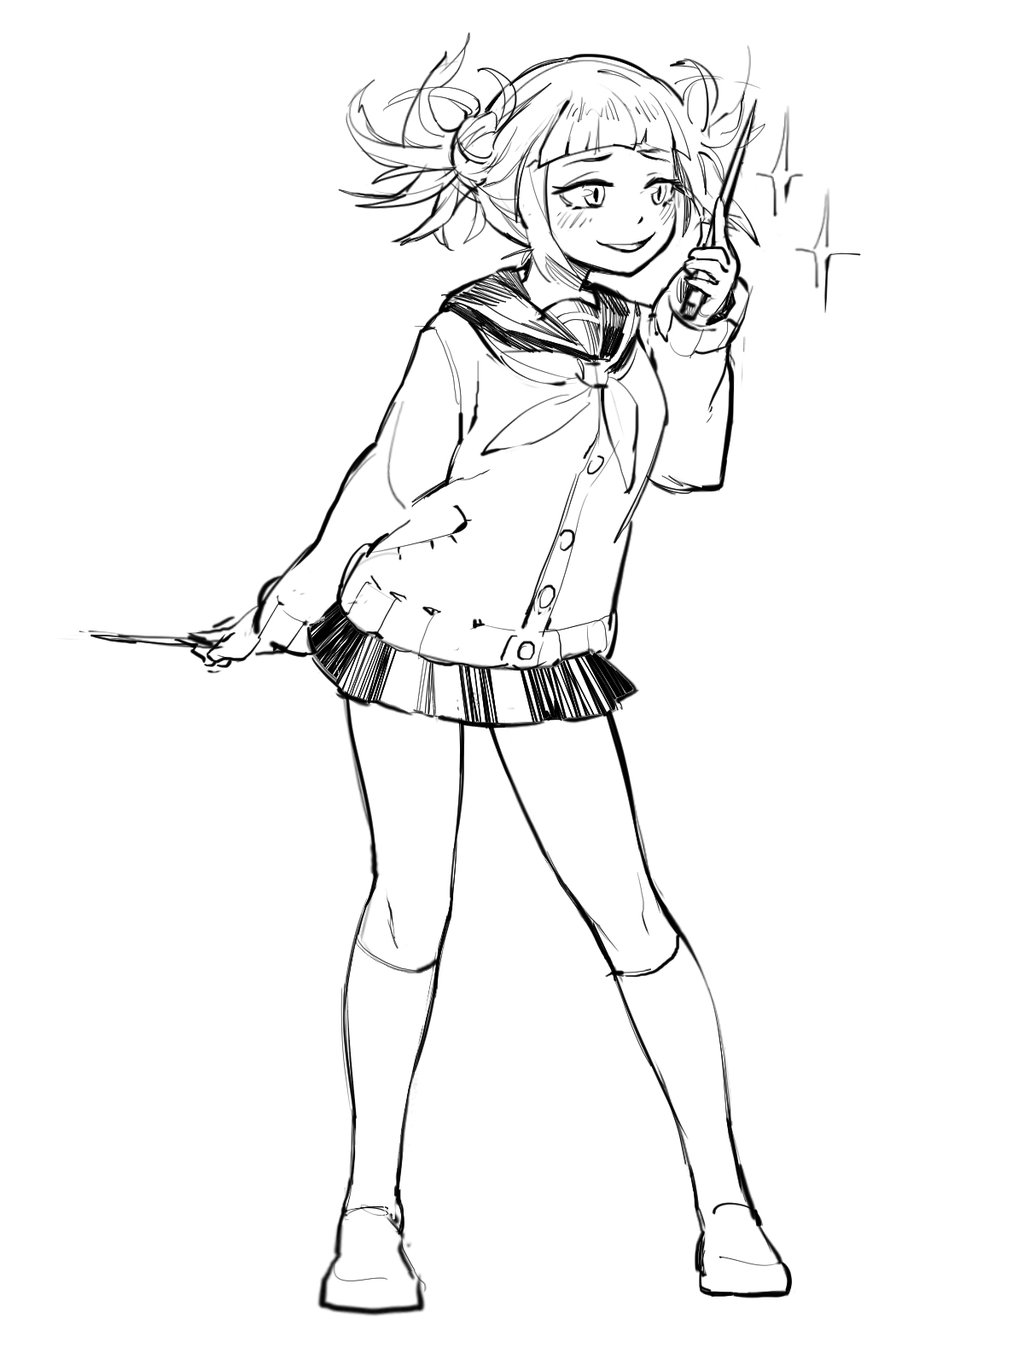 Toga Himiko Image Coloring Pages My Hero Academia Col - vrogue.co